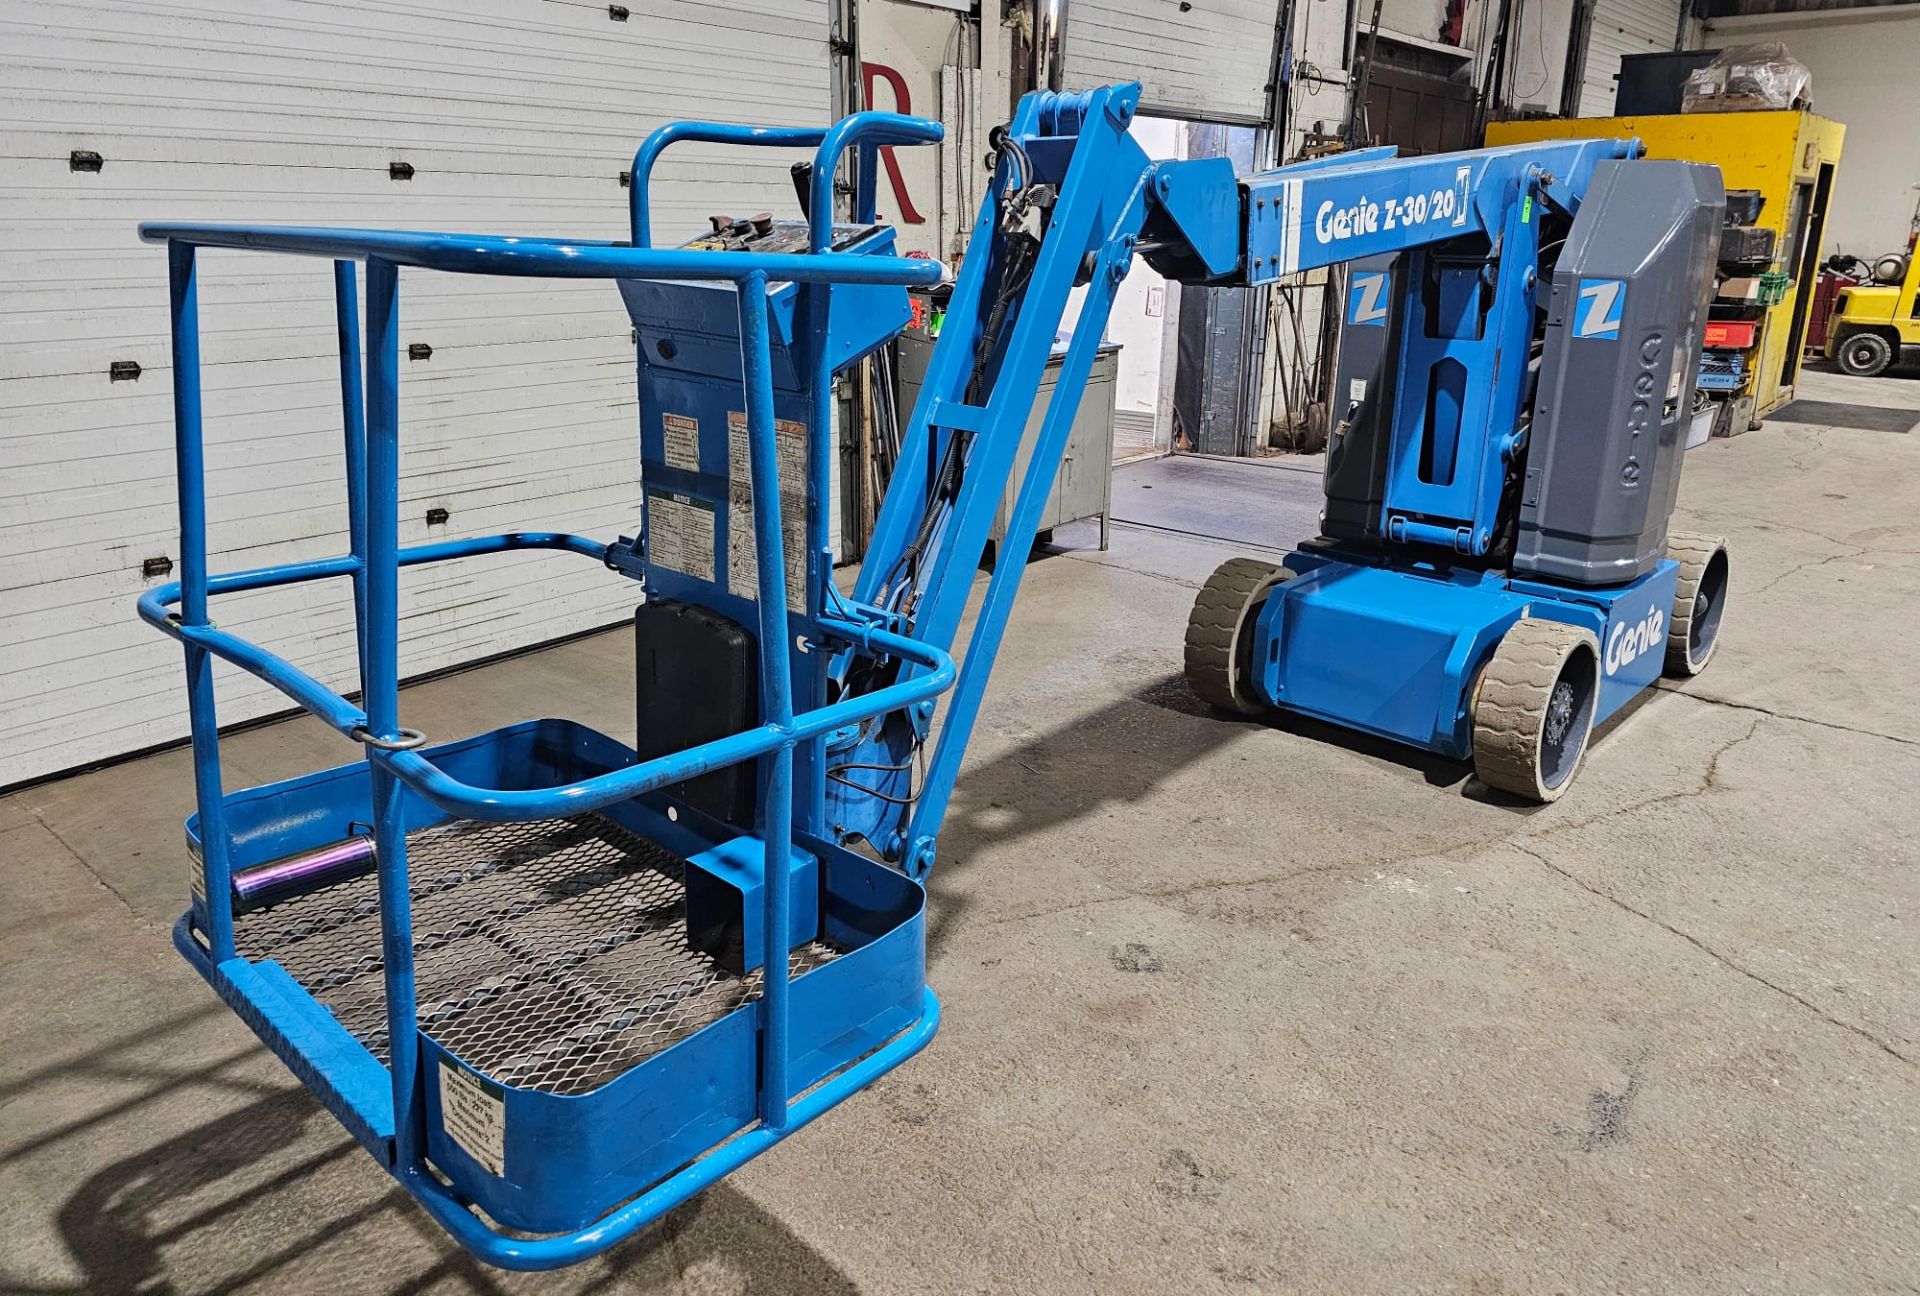 Genie model Z-30-N Zoom Boom Electric Motorized Man Lift 30' Height & 21' Reach - with 24V Battery - Image 5 of 10